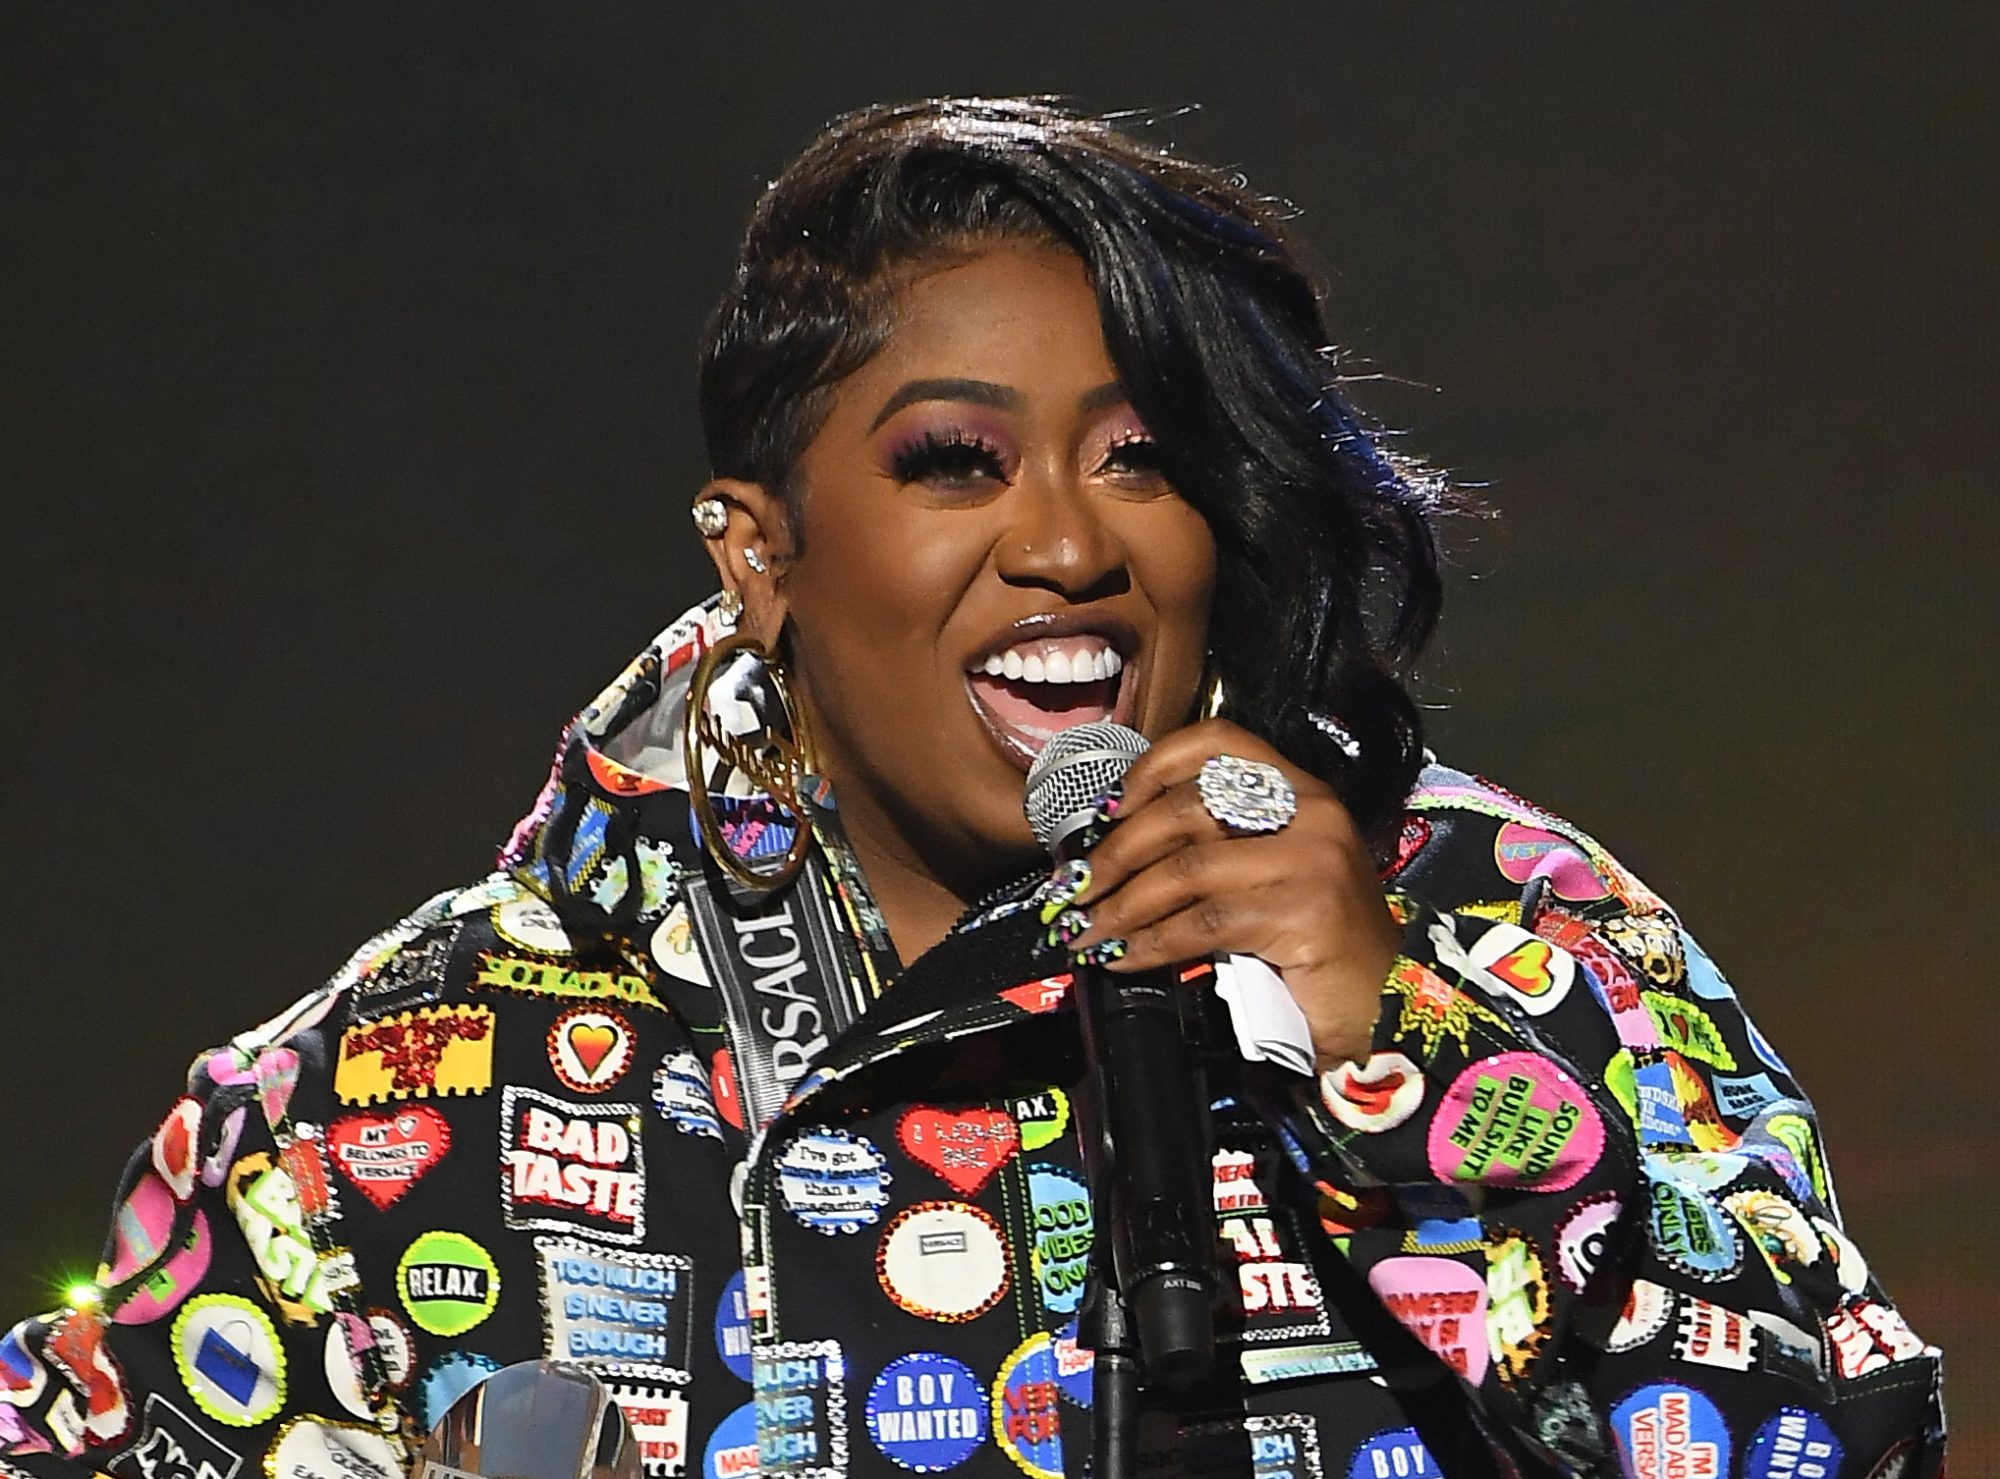 Missy Elliott makes history as first female hip-hop artist to be nominated for the Rock and Roll Hall of Fame